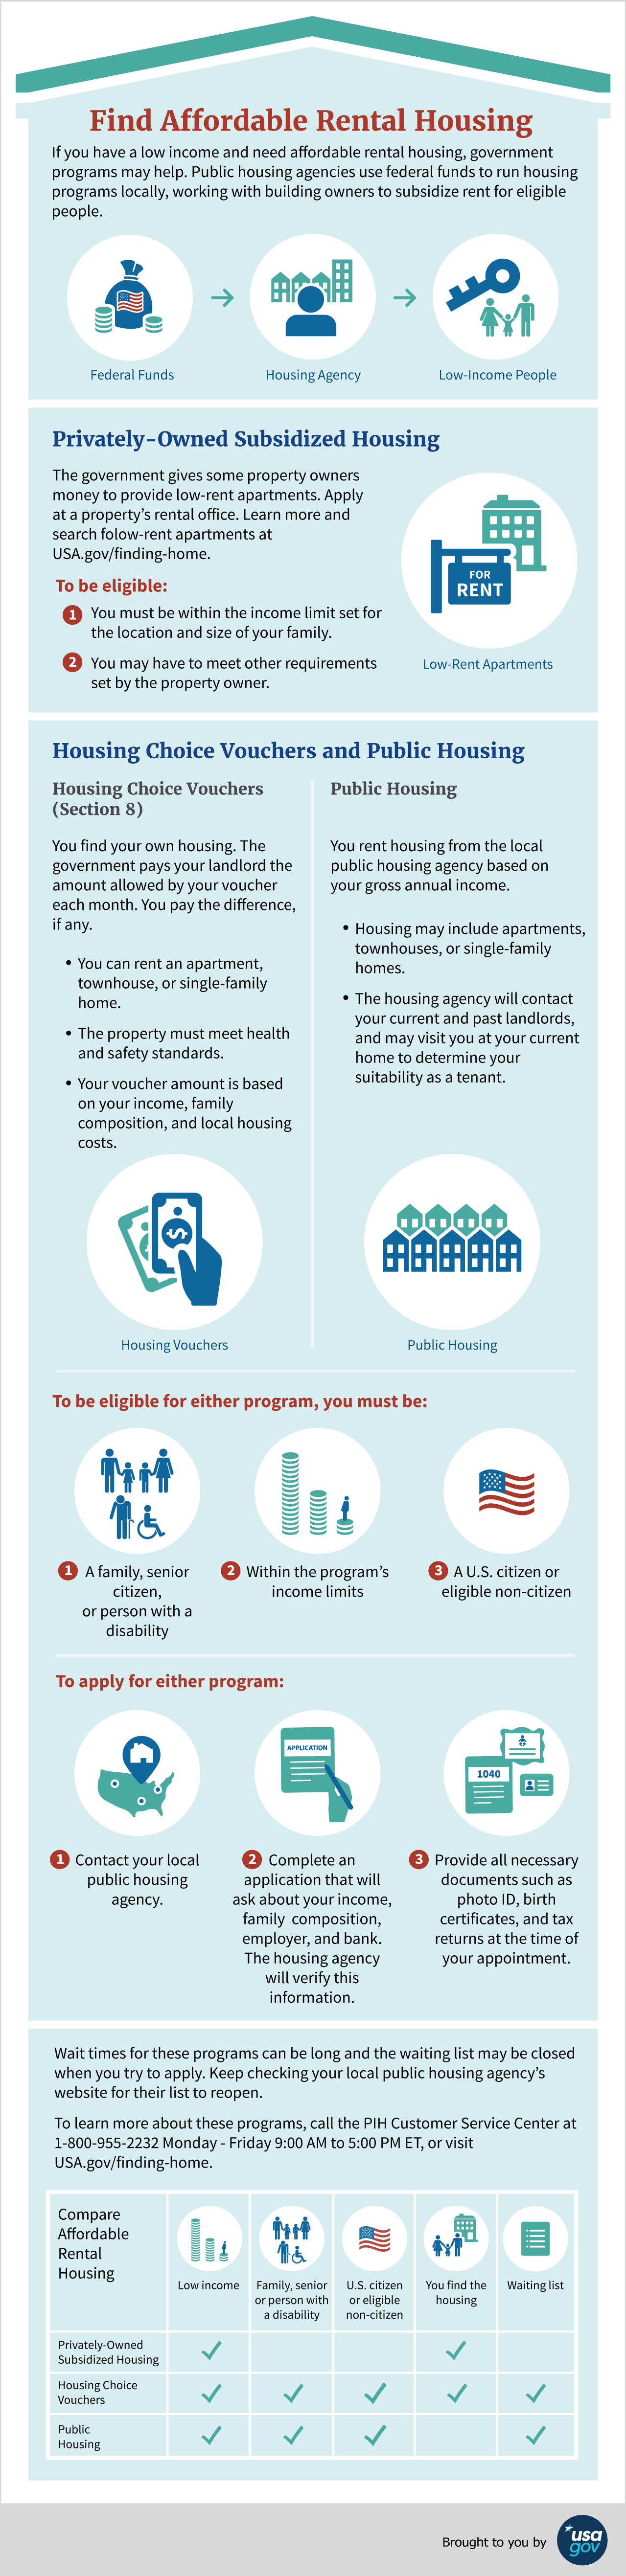 Infographic explaining three programs to help low income people get affordable rental housing.